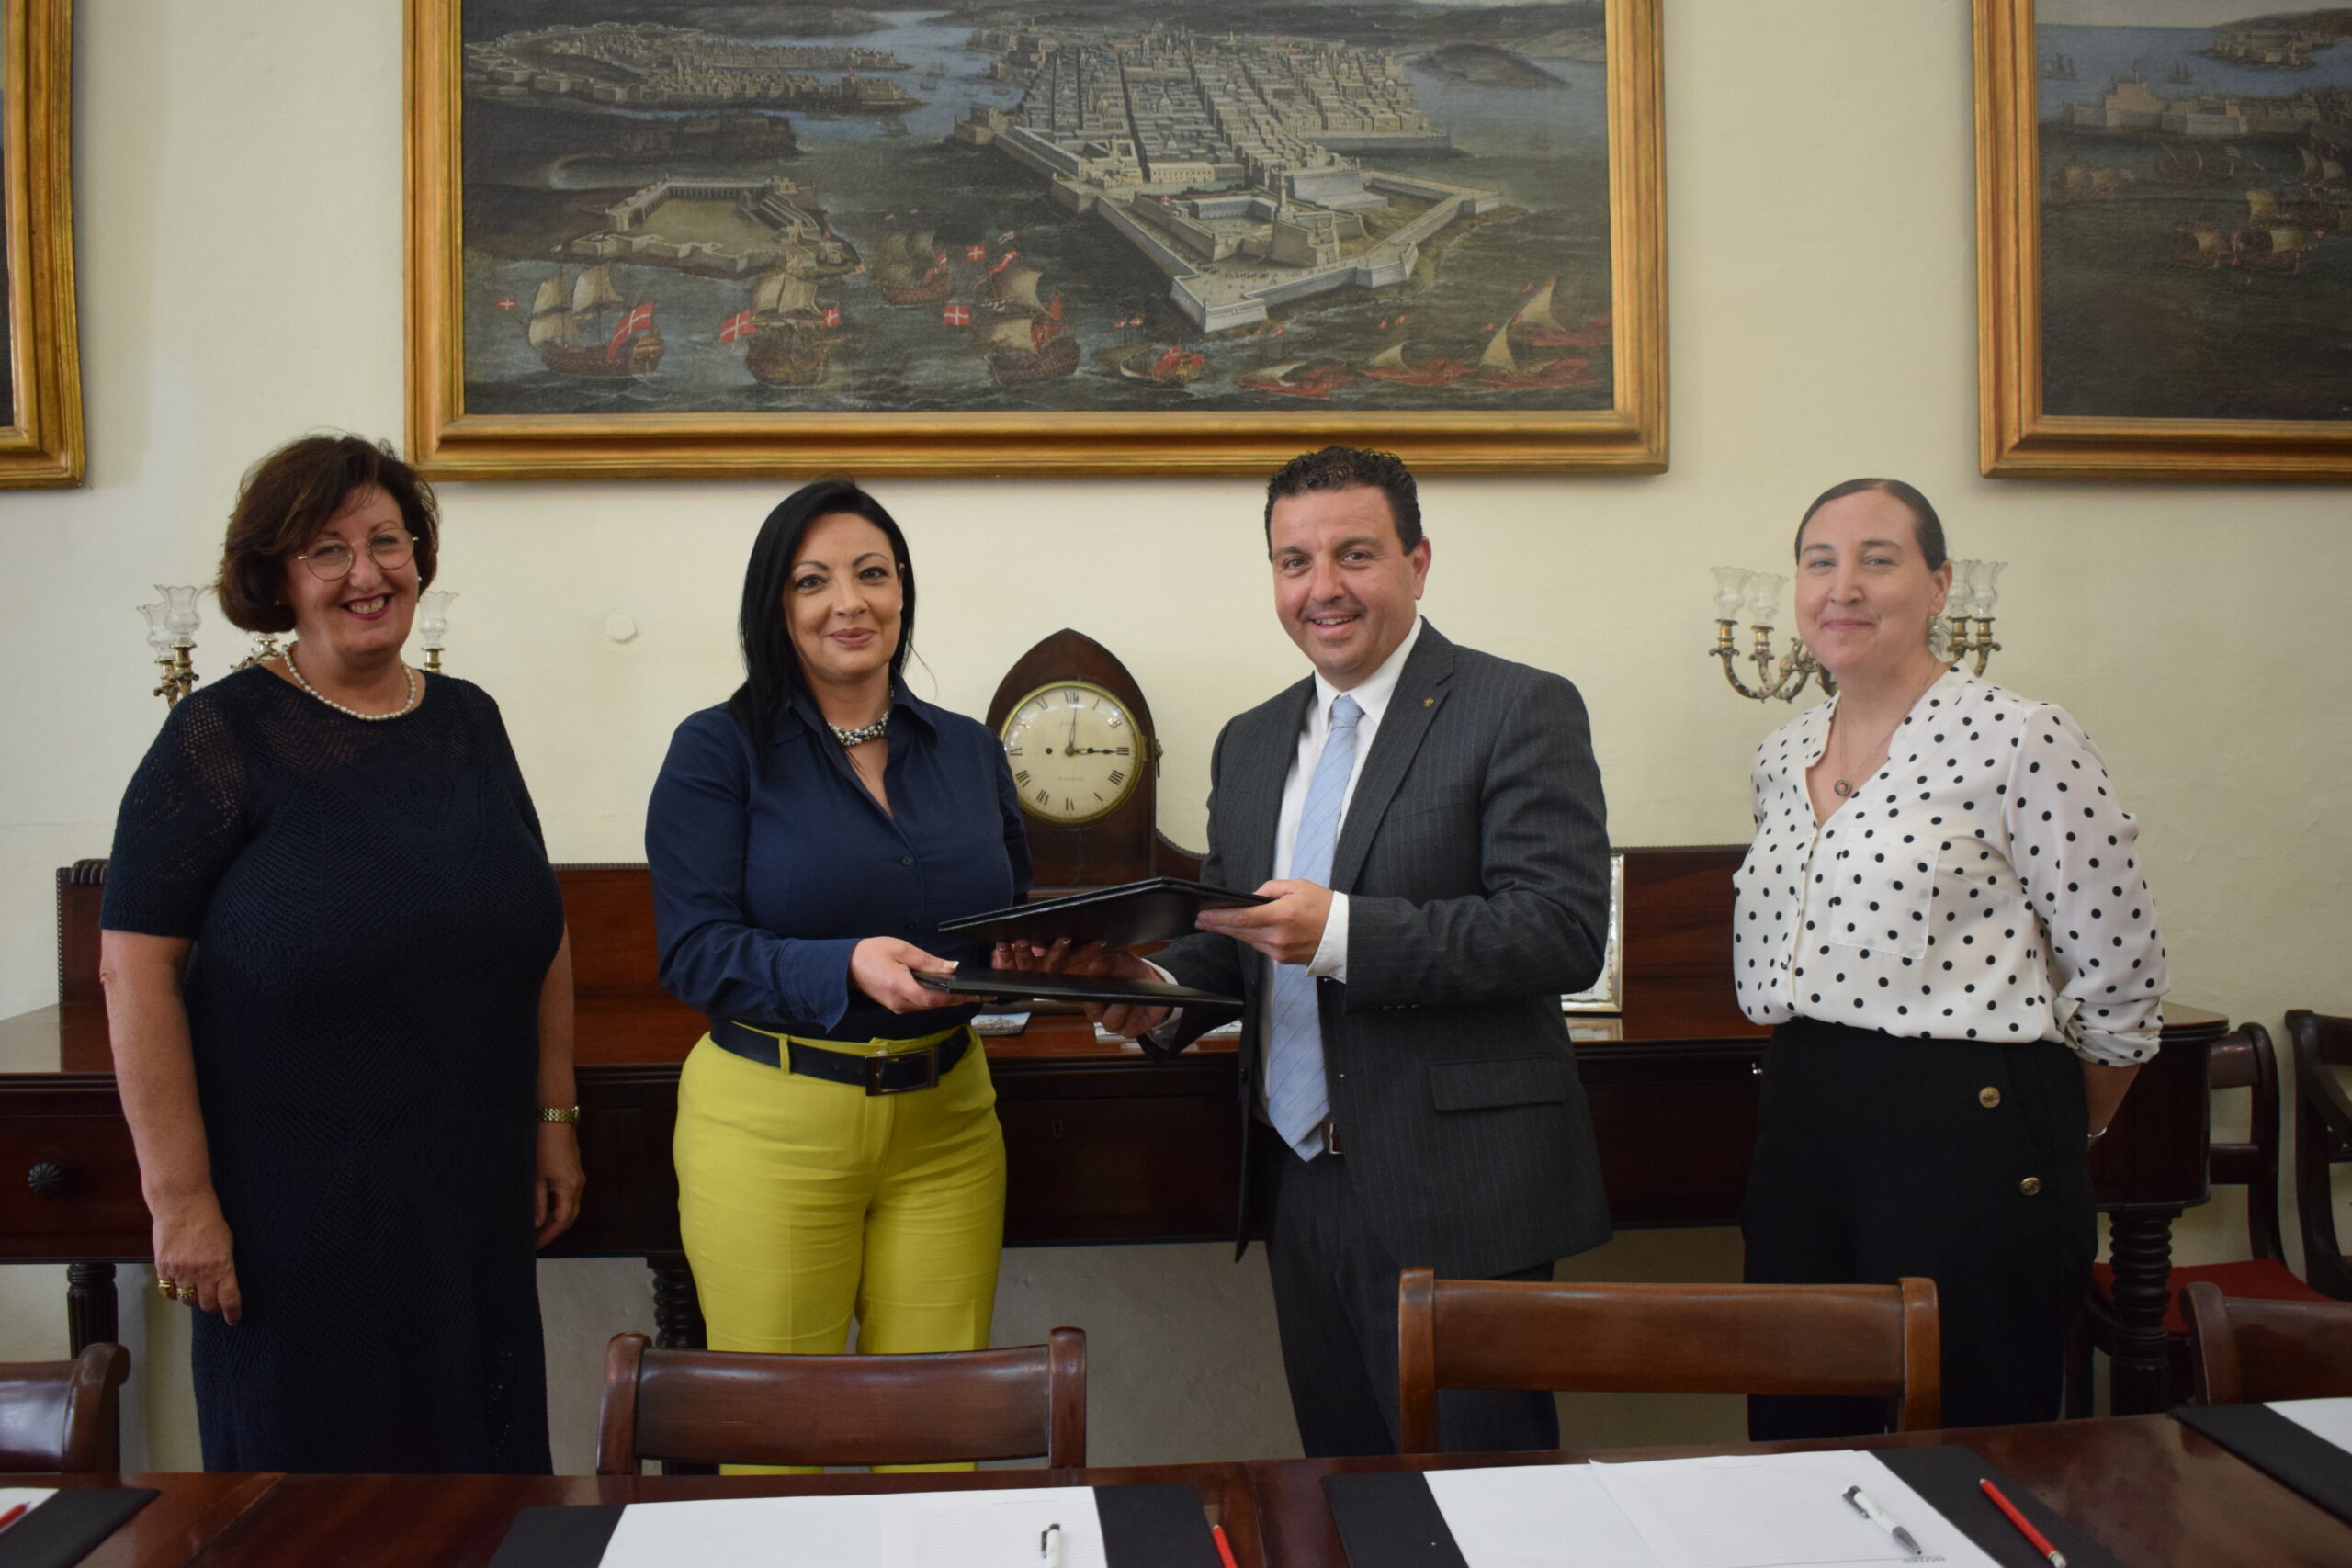 The Malta Chamber and Xara Palace sign Alliance Agreement to promote sustainability in business practices